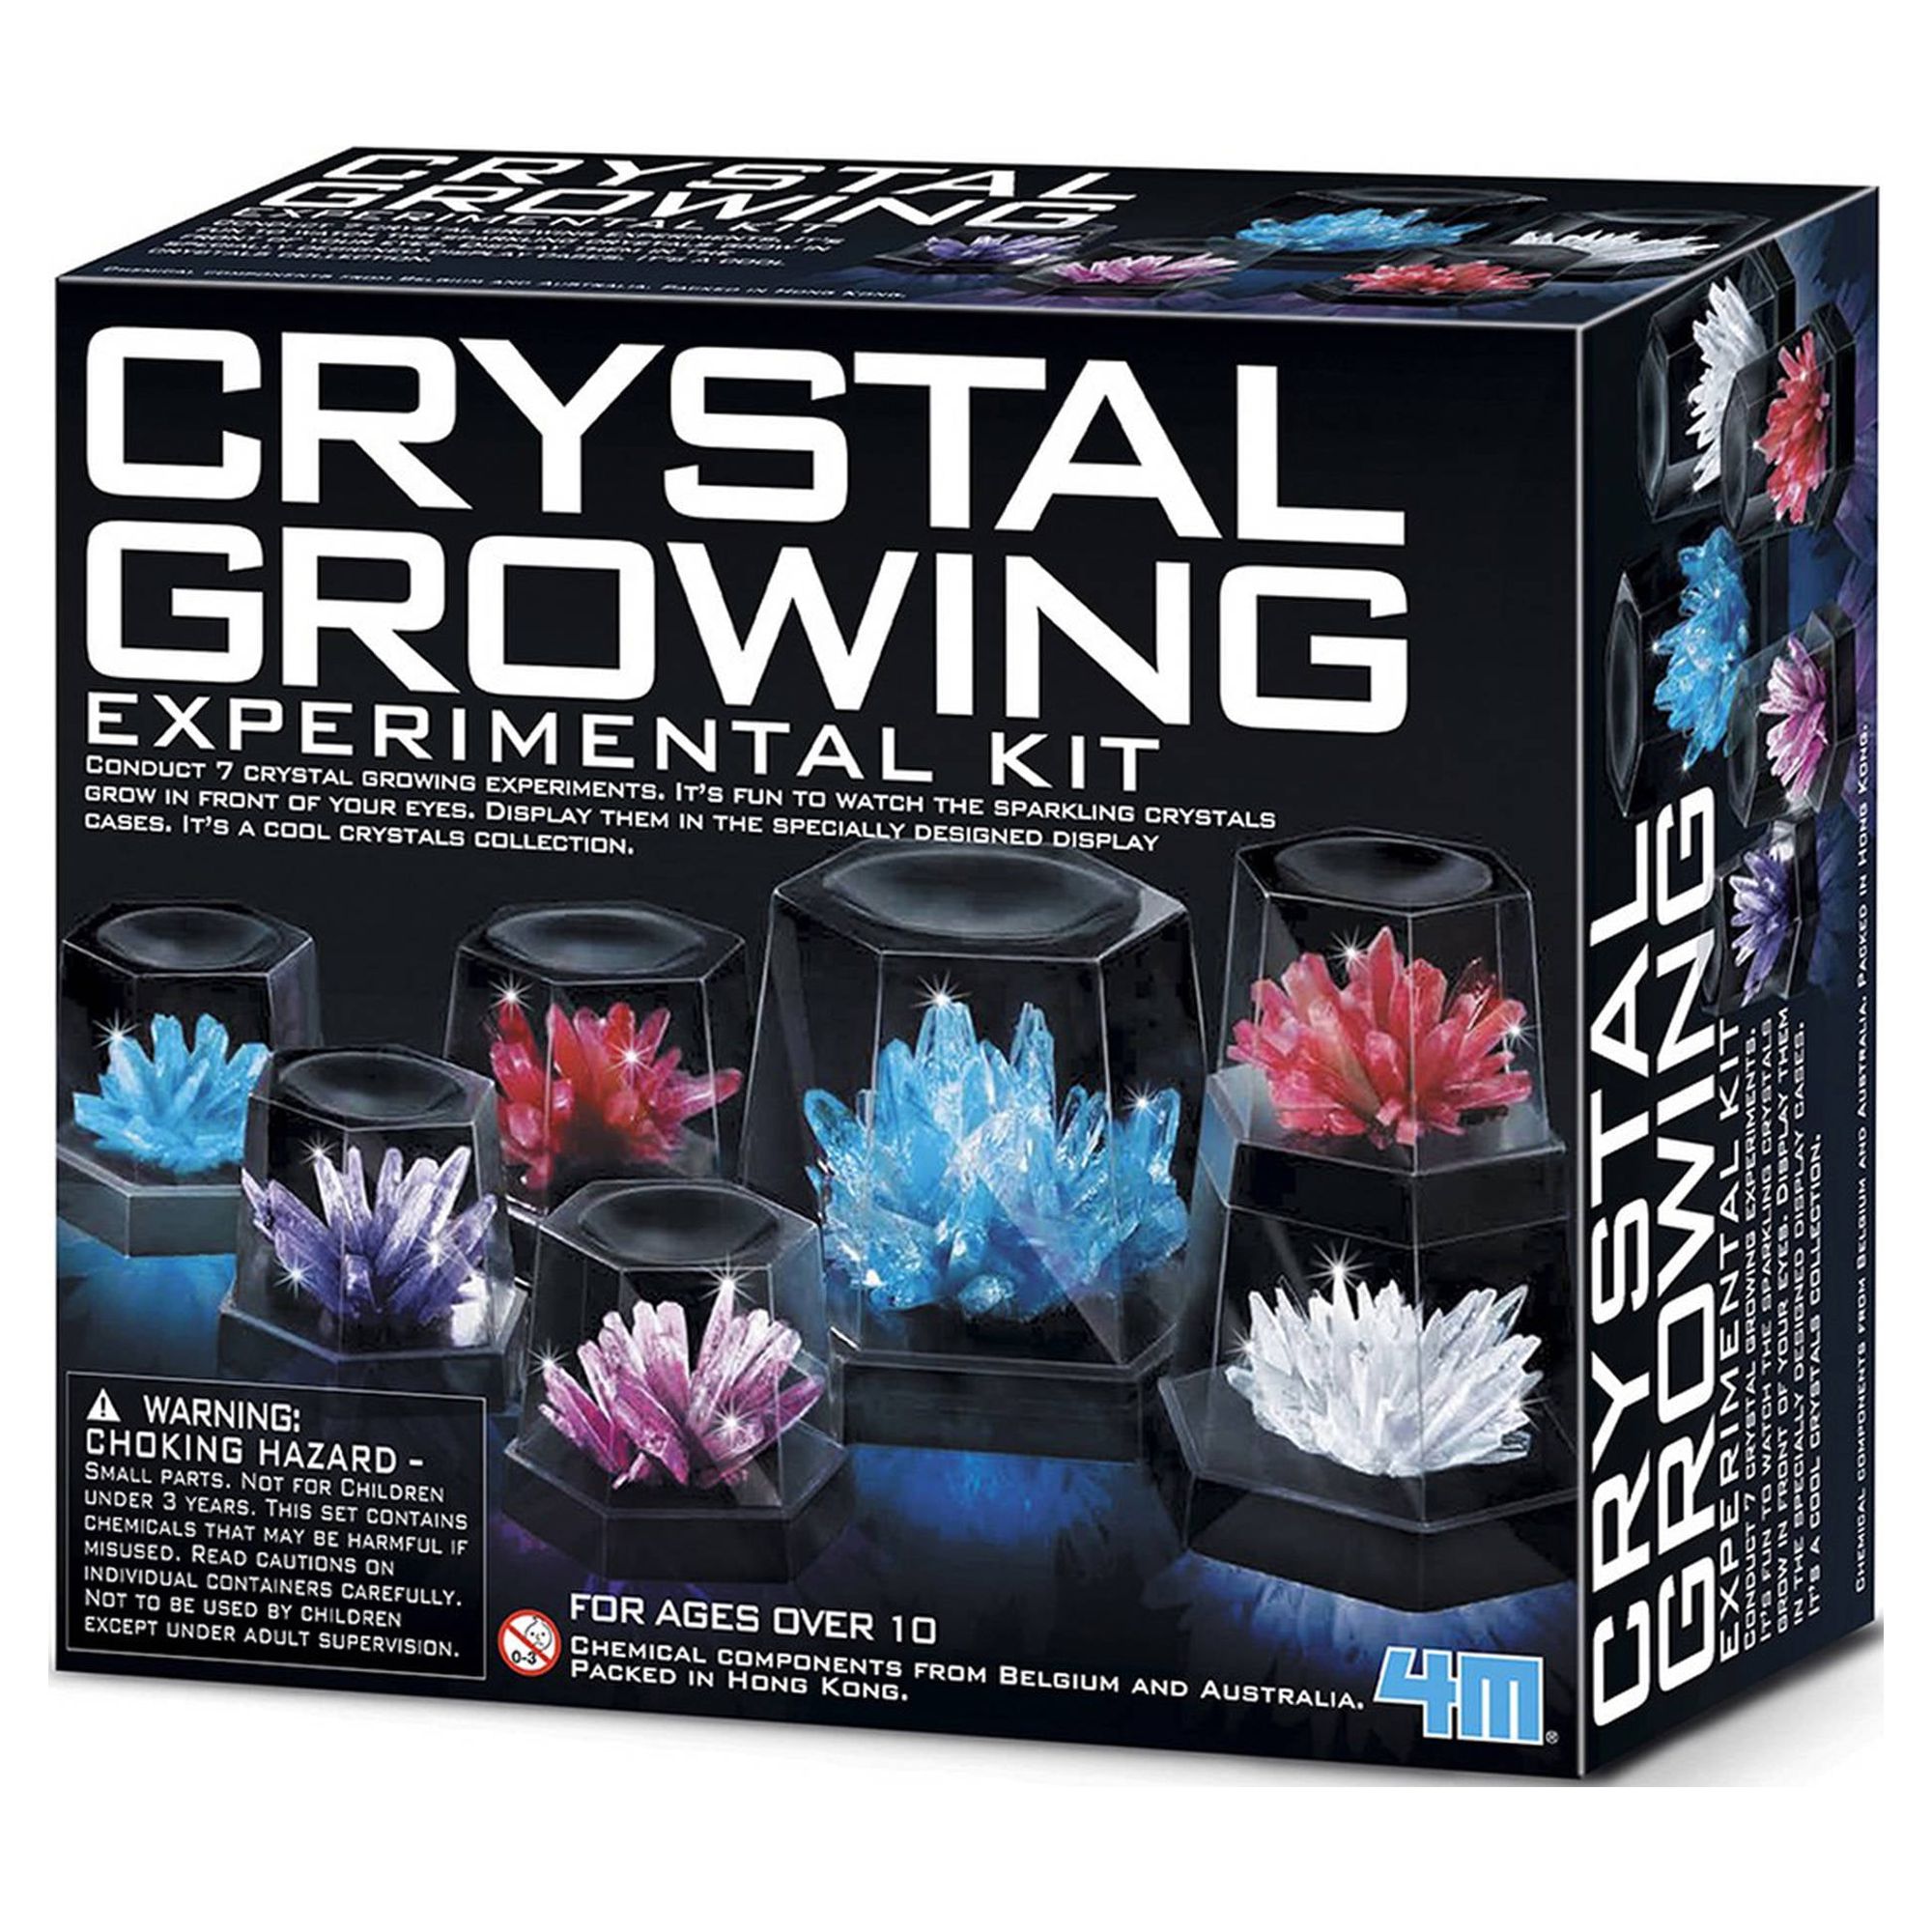 Growing　Crystal　4M　with　Kit　Science　Model　Experiments